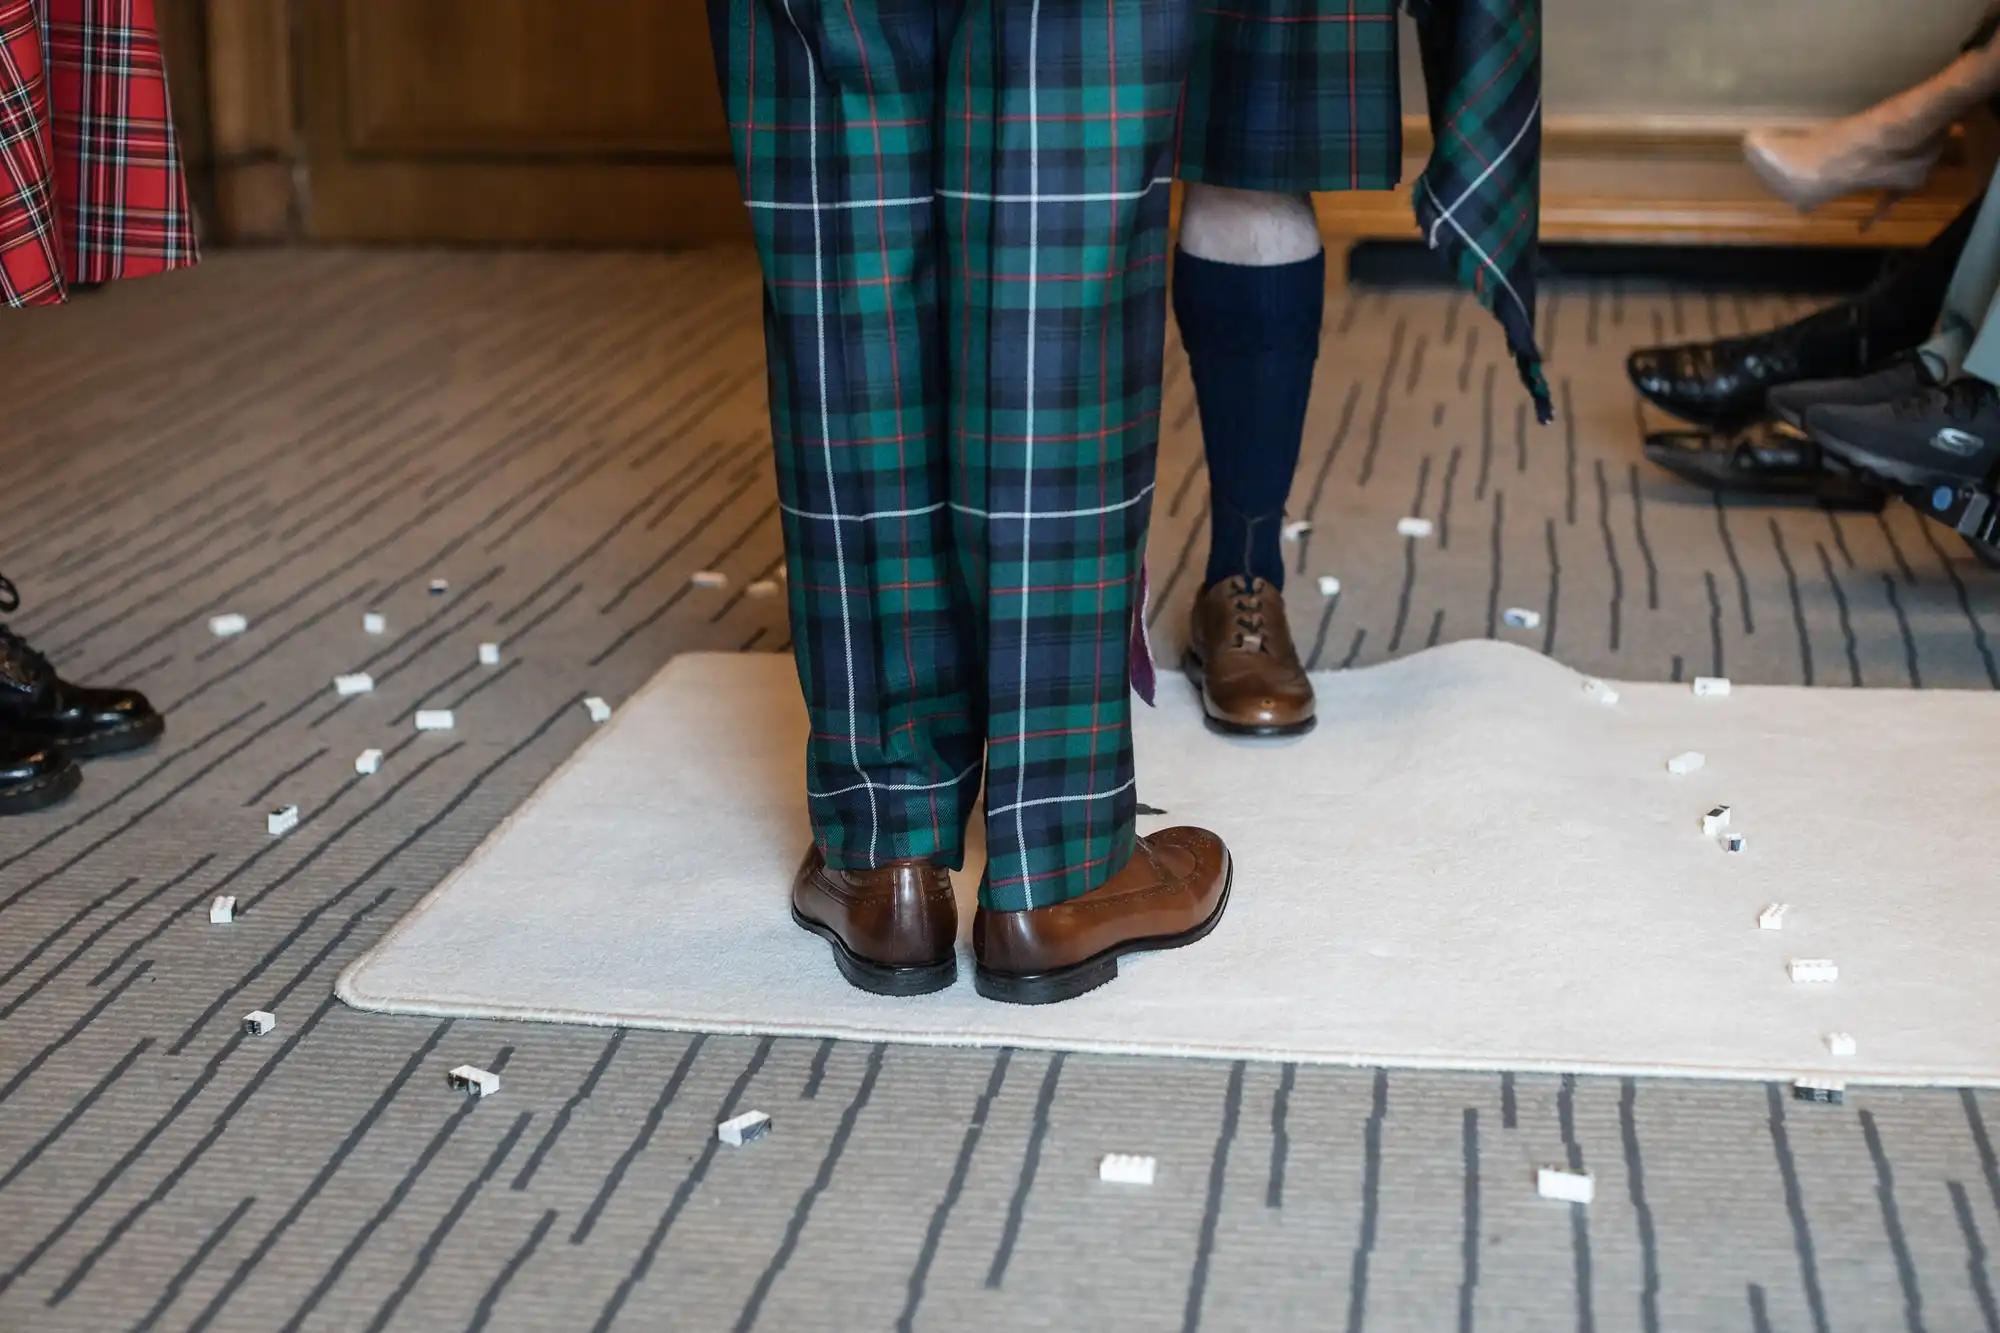 Two people wearing green tartan kilts and brown shoes stand on a white rug scattered with small white pieces, on a striped gray carpet.